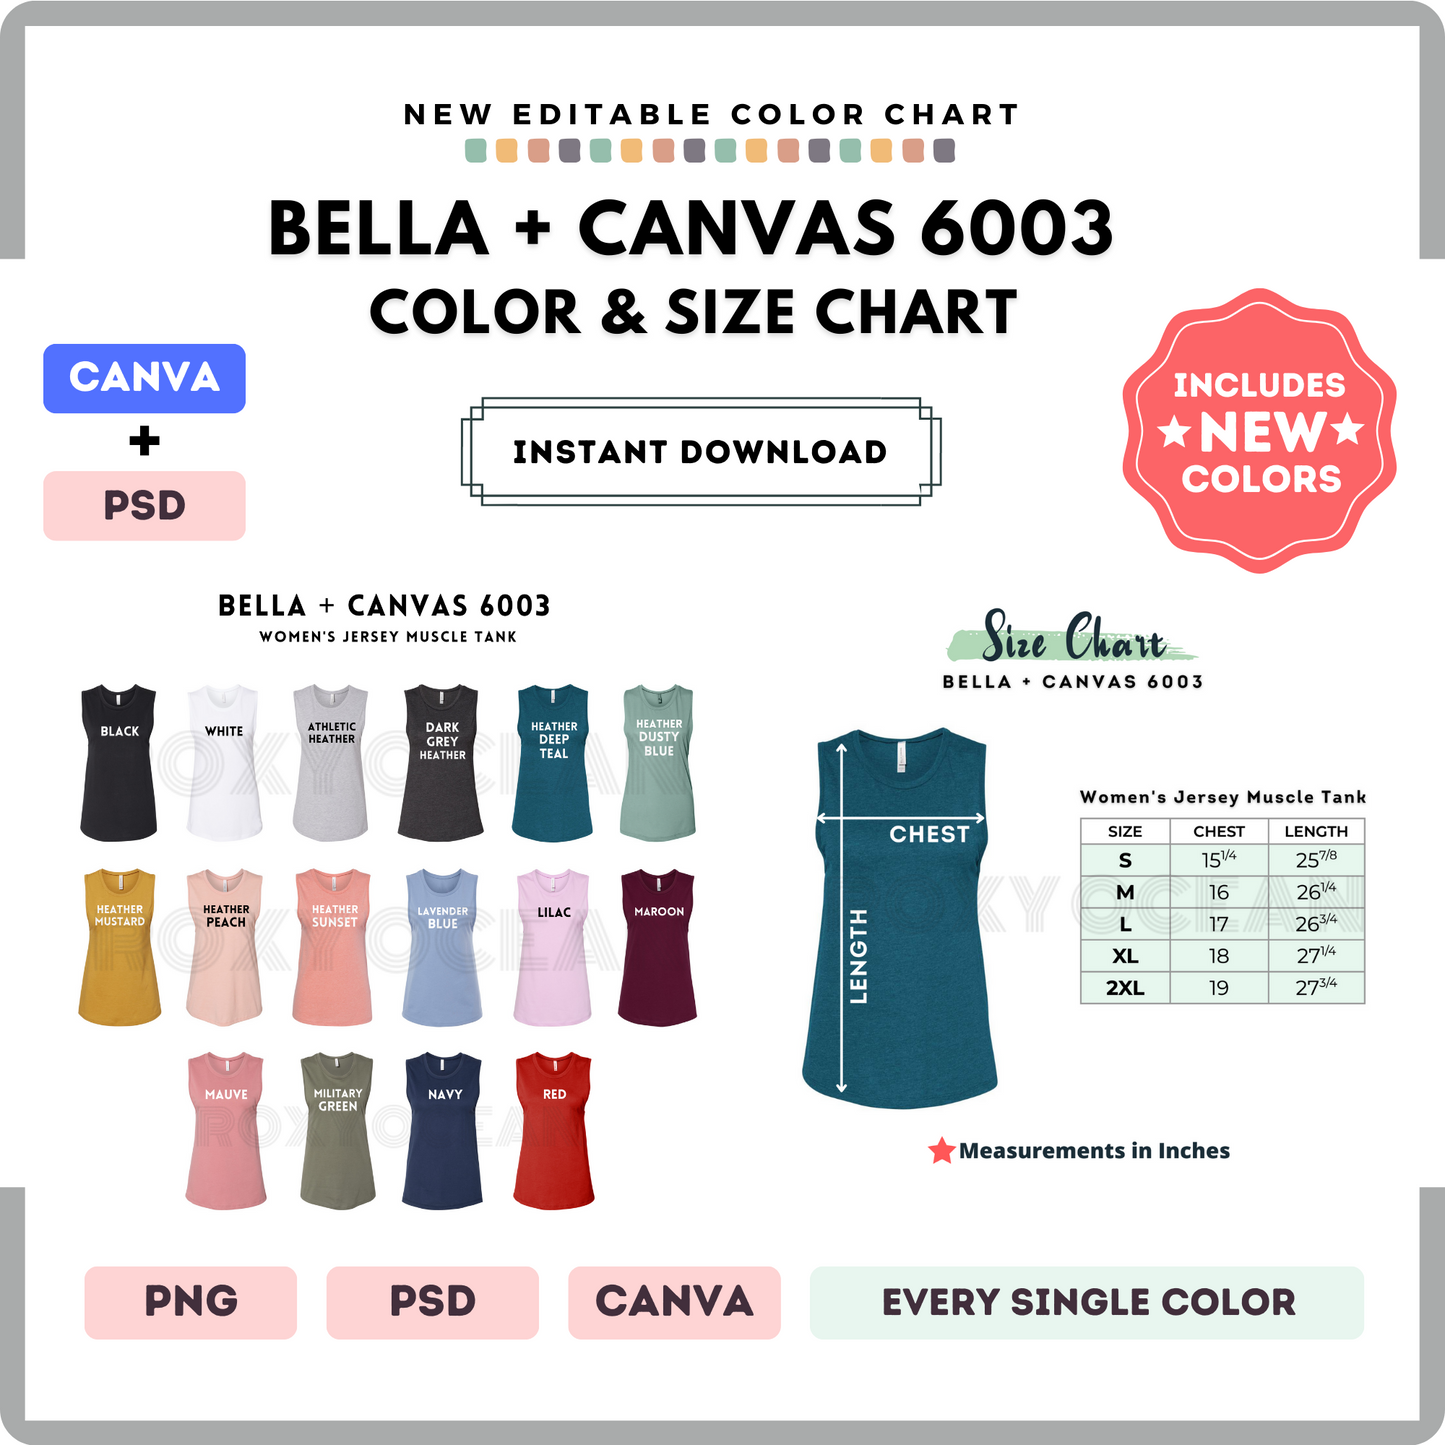 Bella Canvas 6003 Color and Size Chart